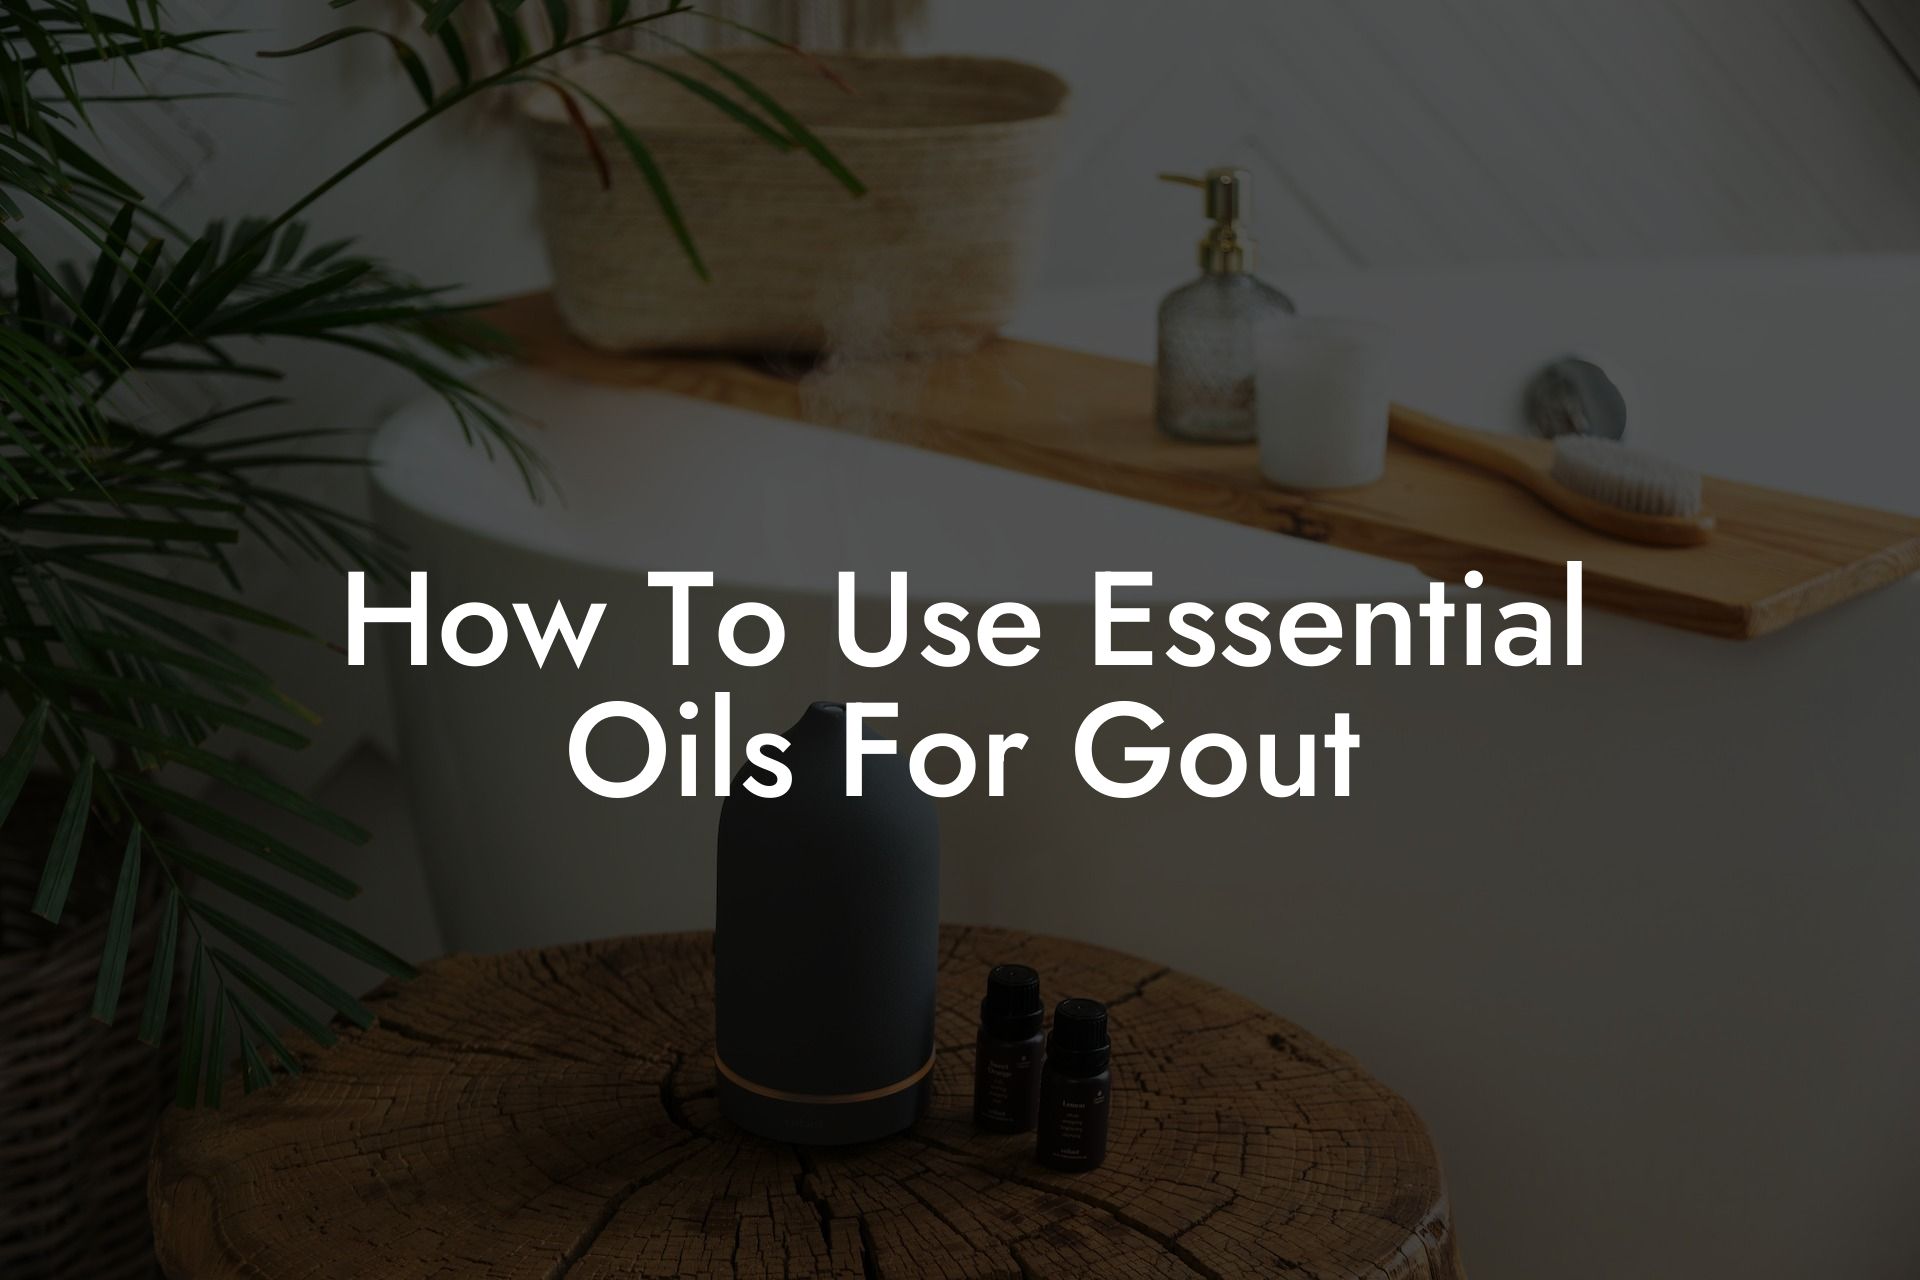 How To Use Essential Oils For Gout